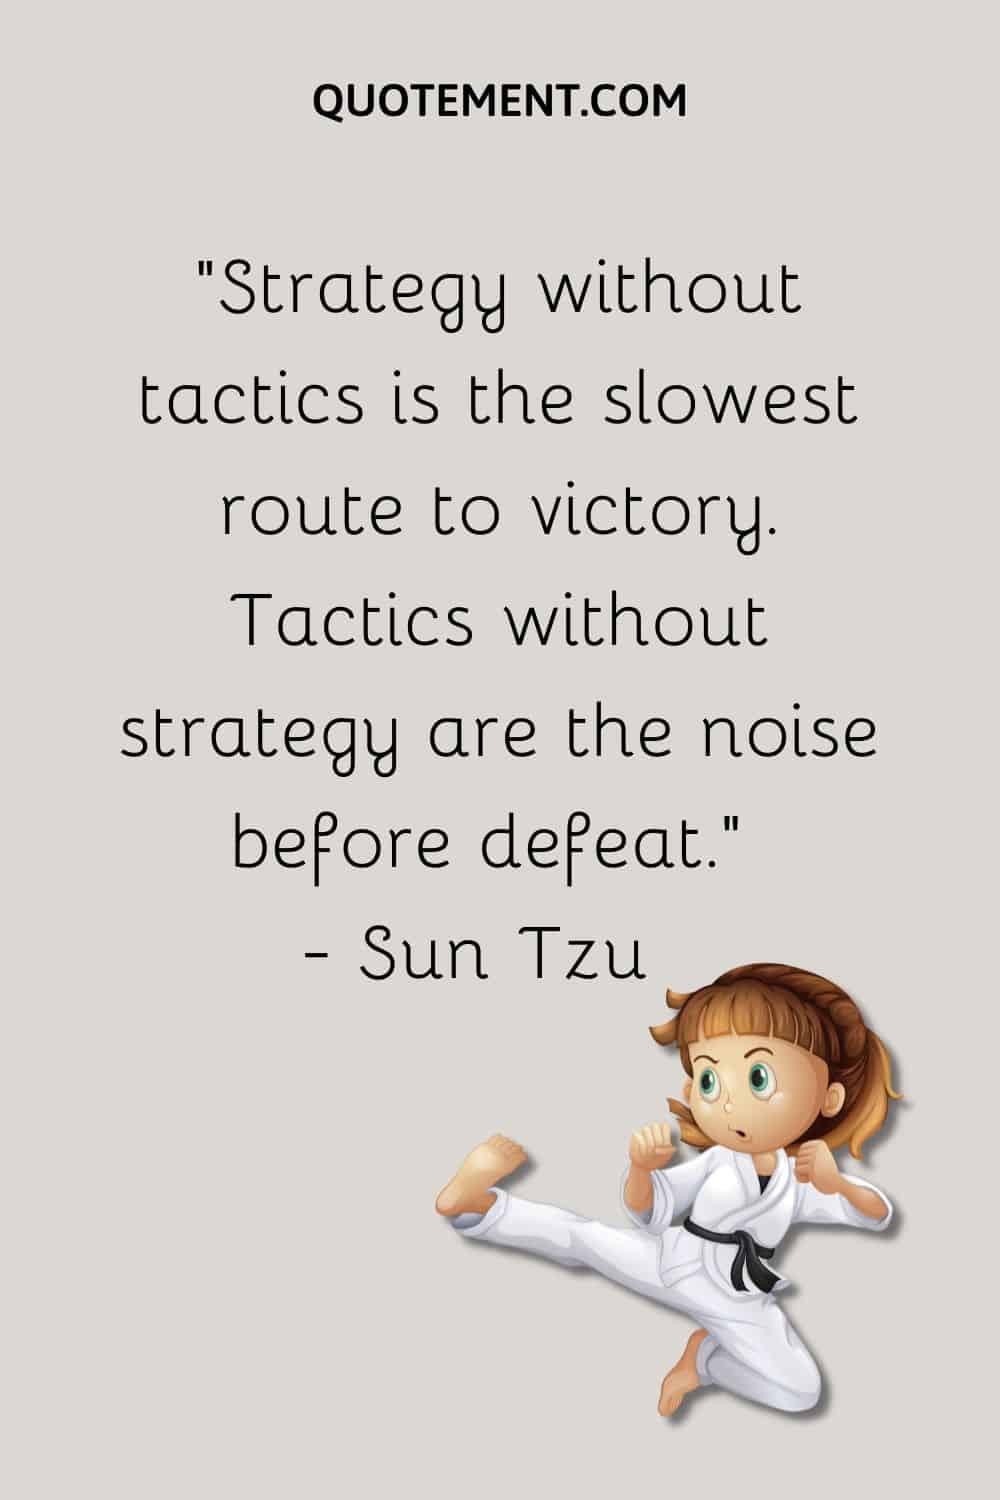 Strategy without tactics is the slowest route to victory